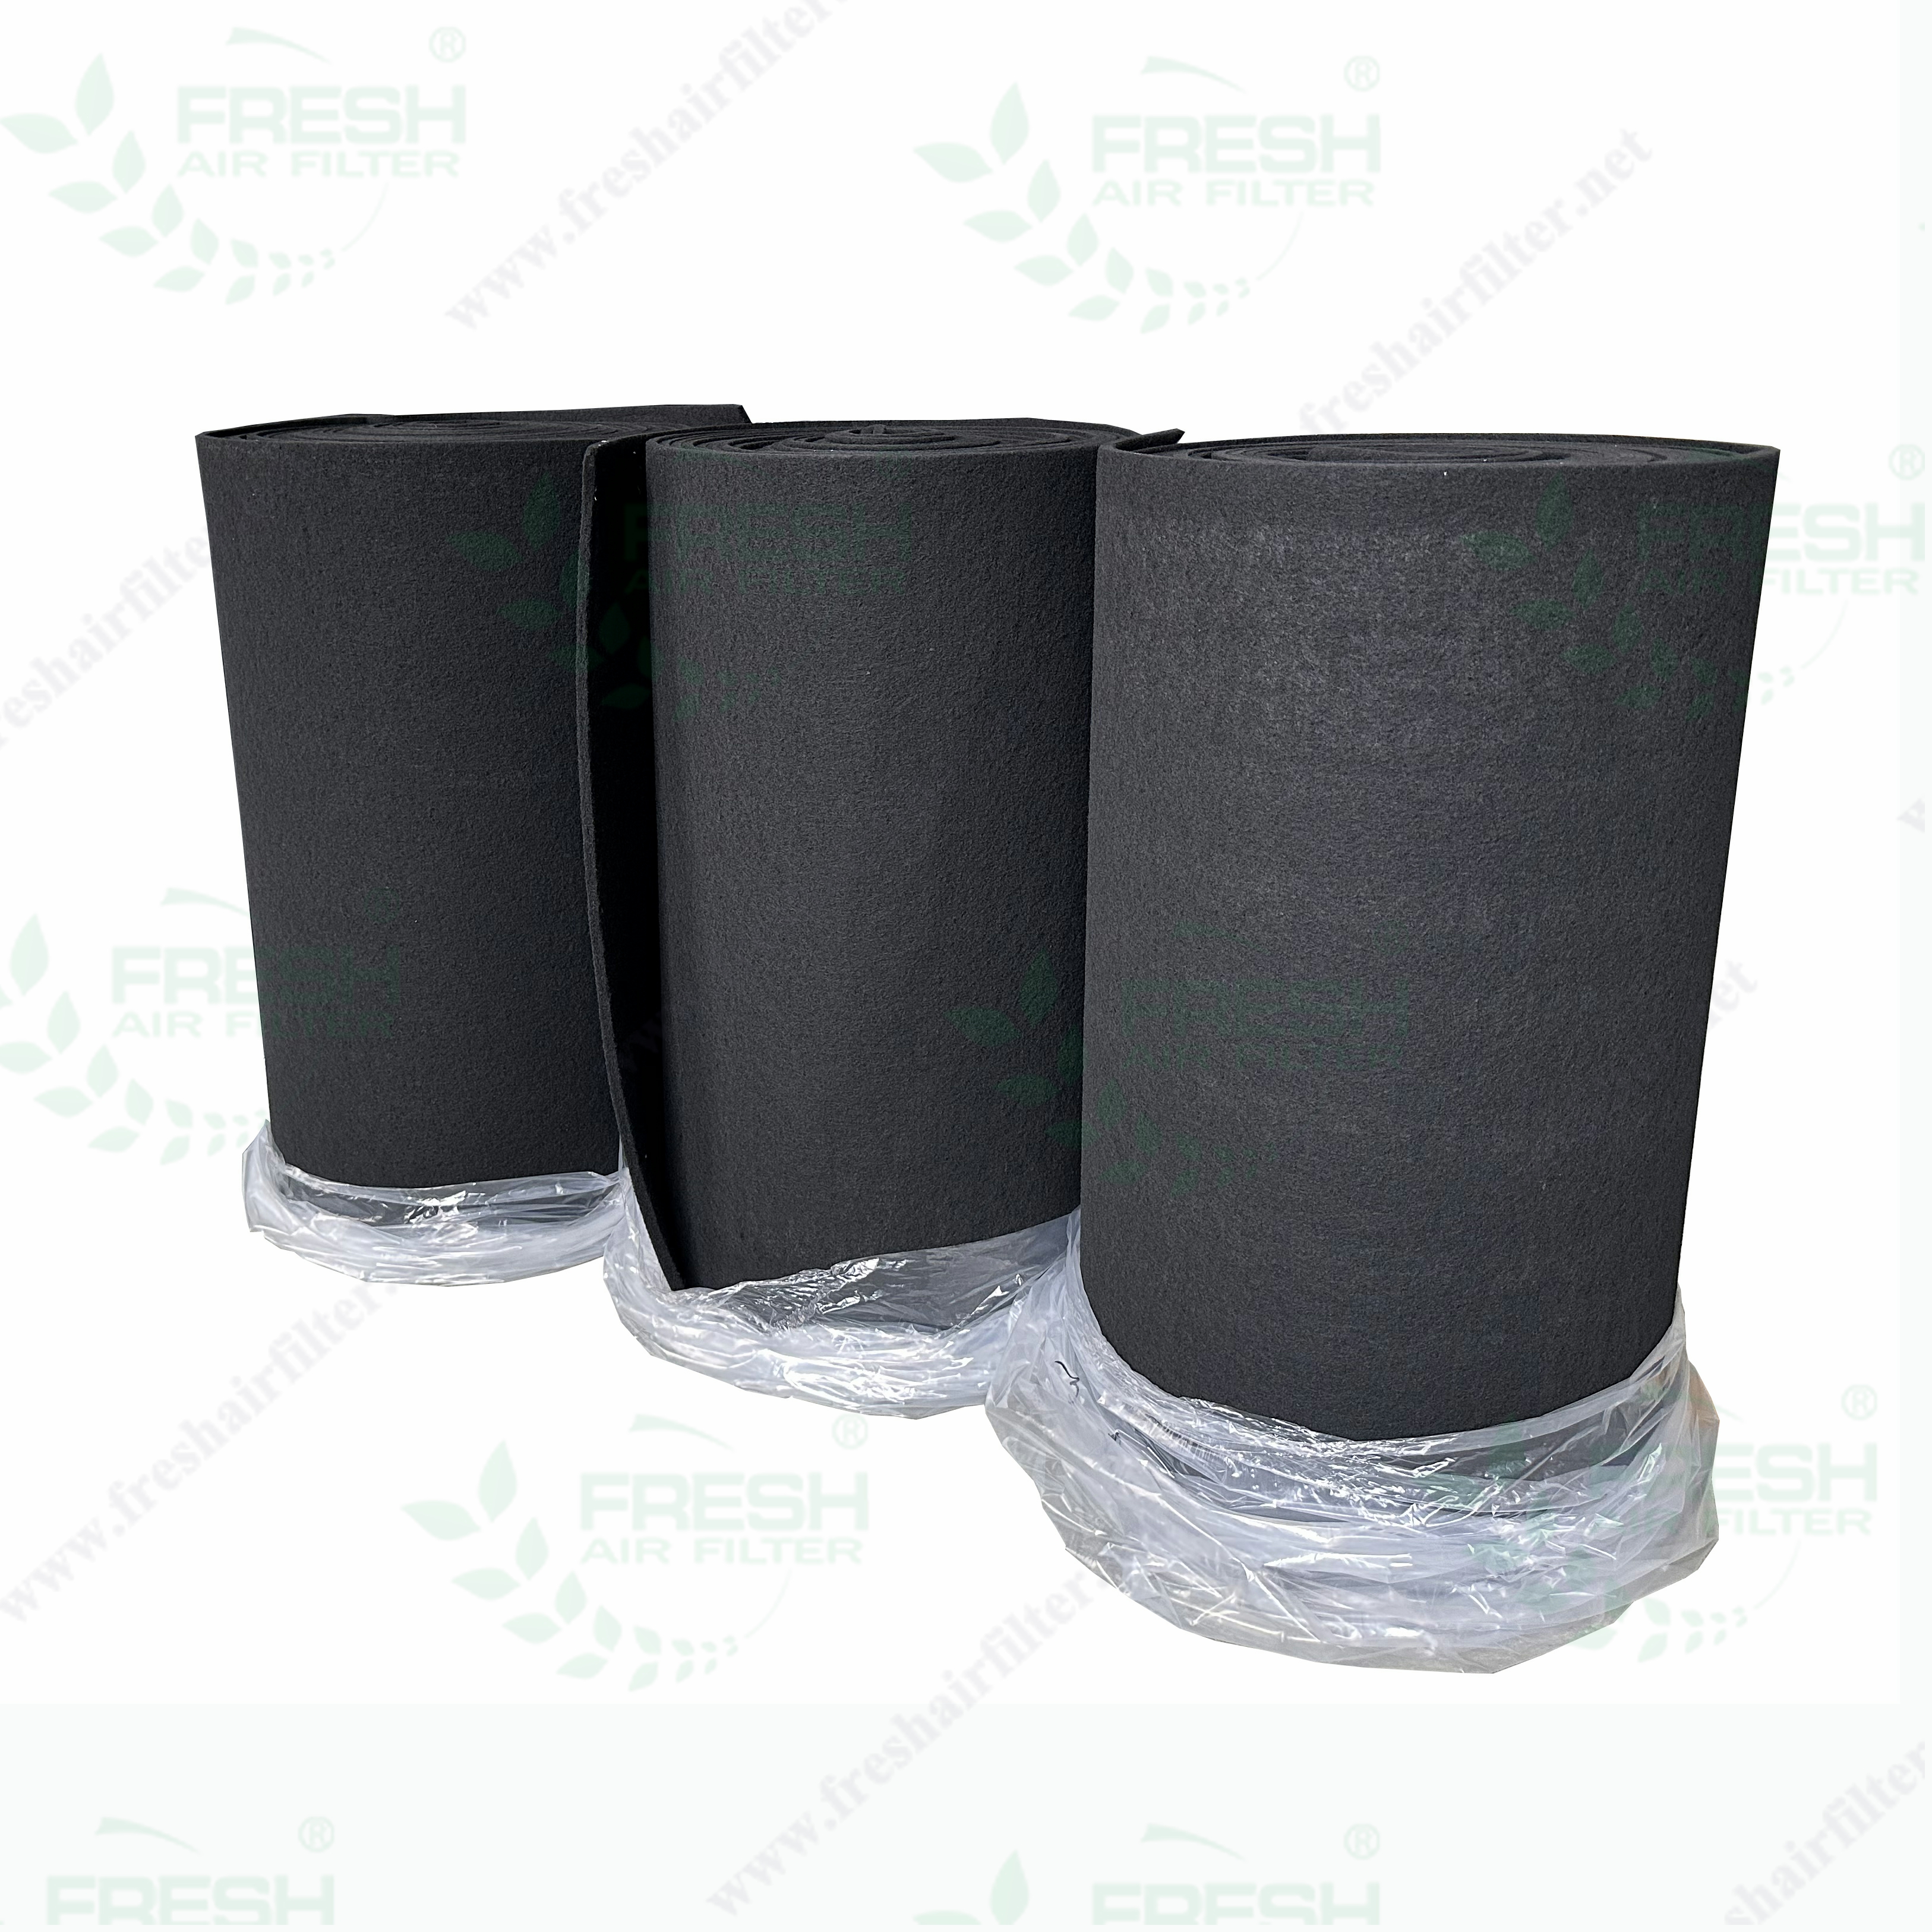 Activated carbon filter media (15)